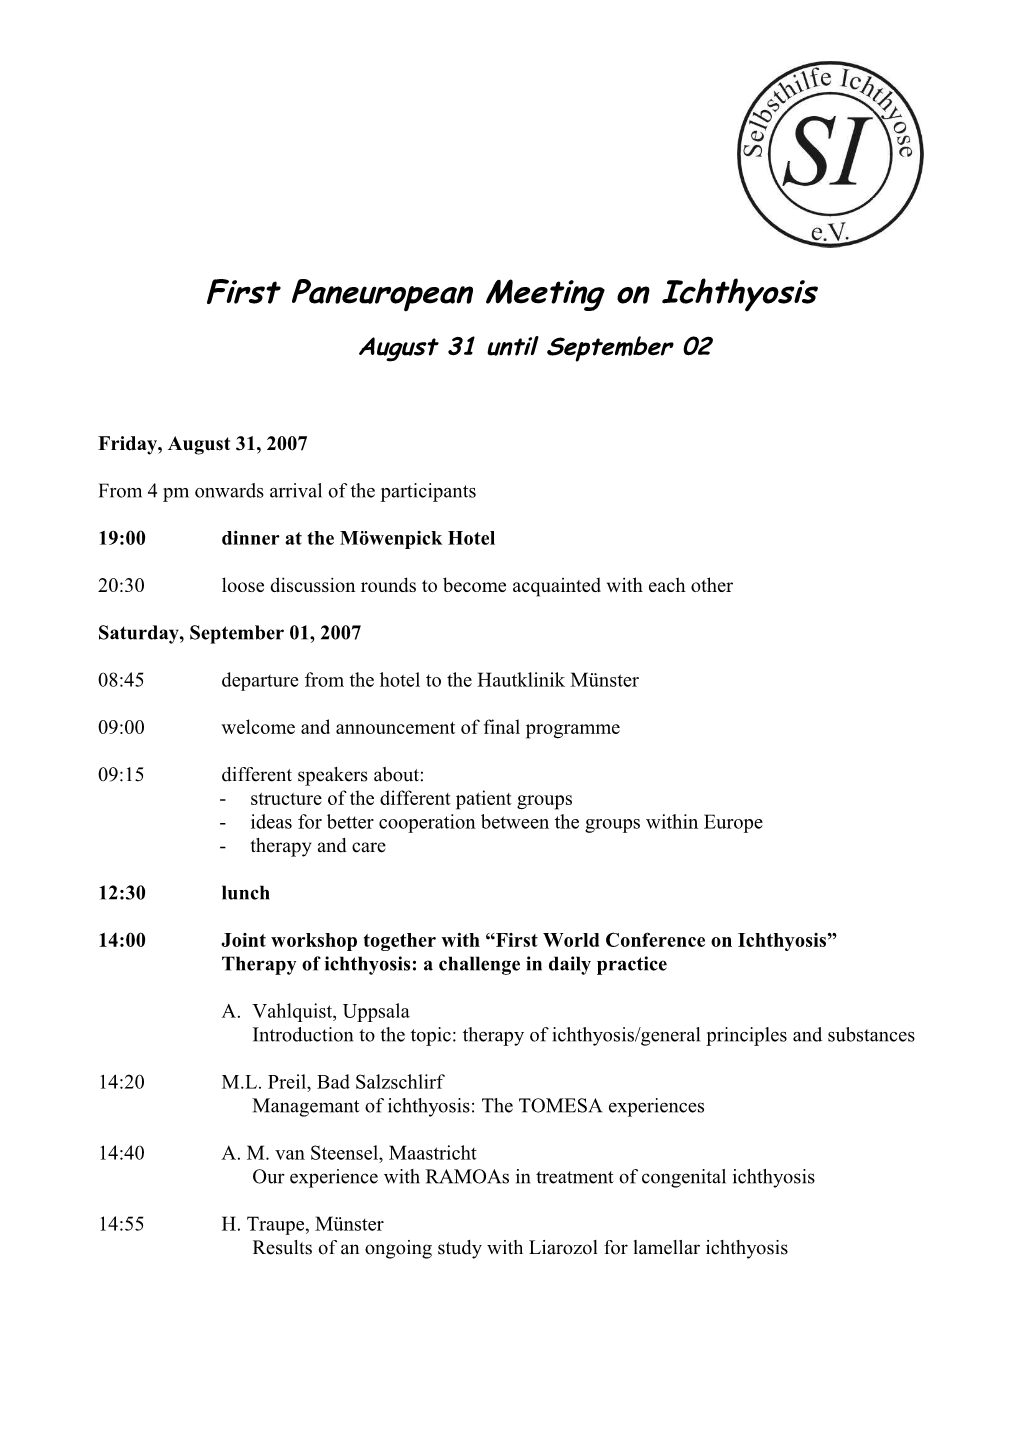 First Paneuropean Meeting on Ichthyosis